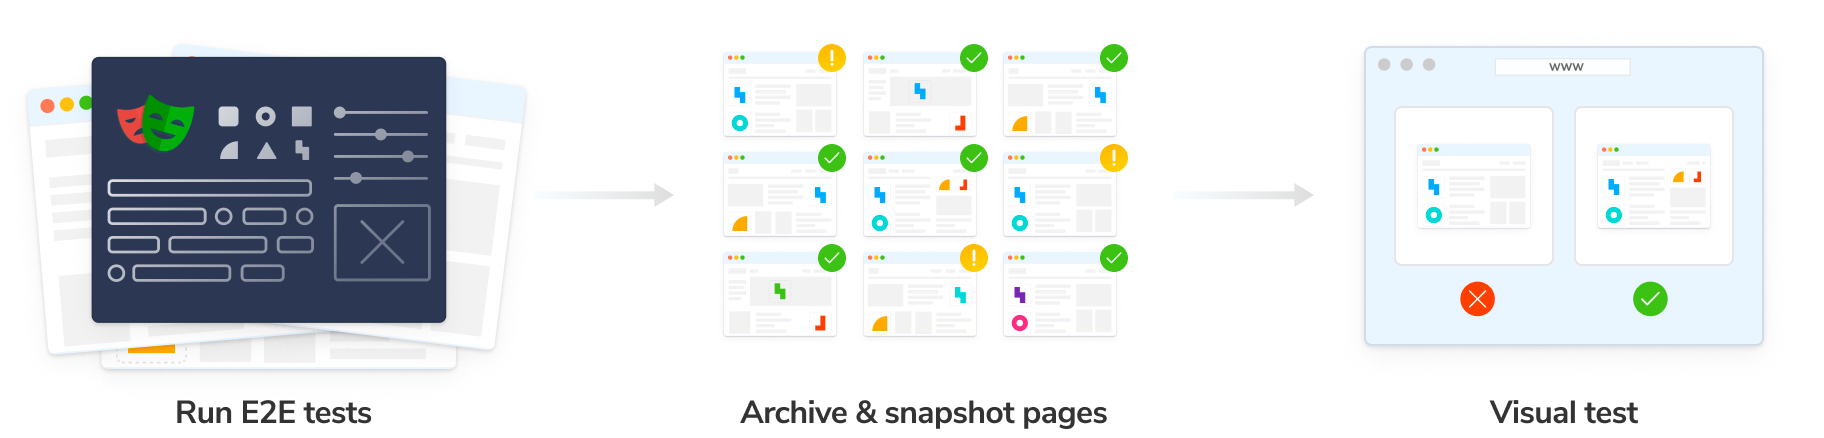 The illustrations with arrows showing the flow from one to the next: Run E2E tests, Archive & snapshot pages, Visual test